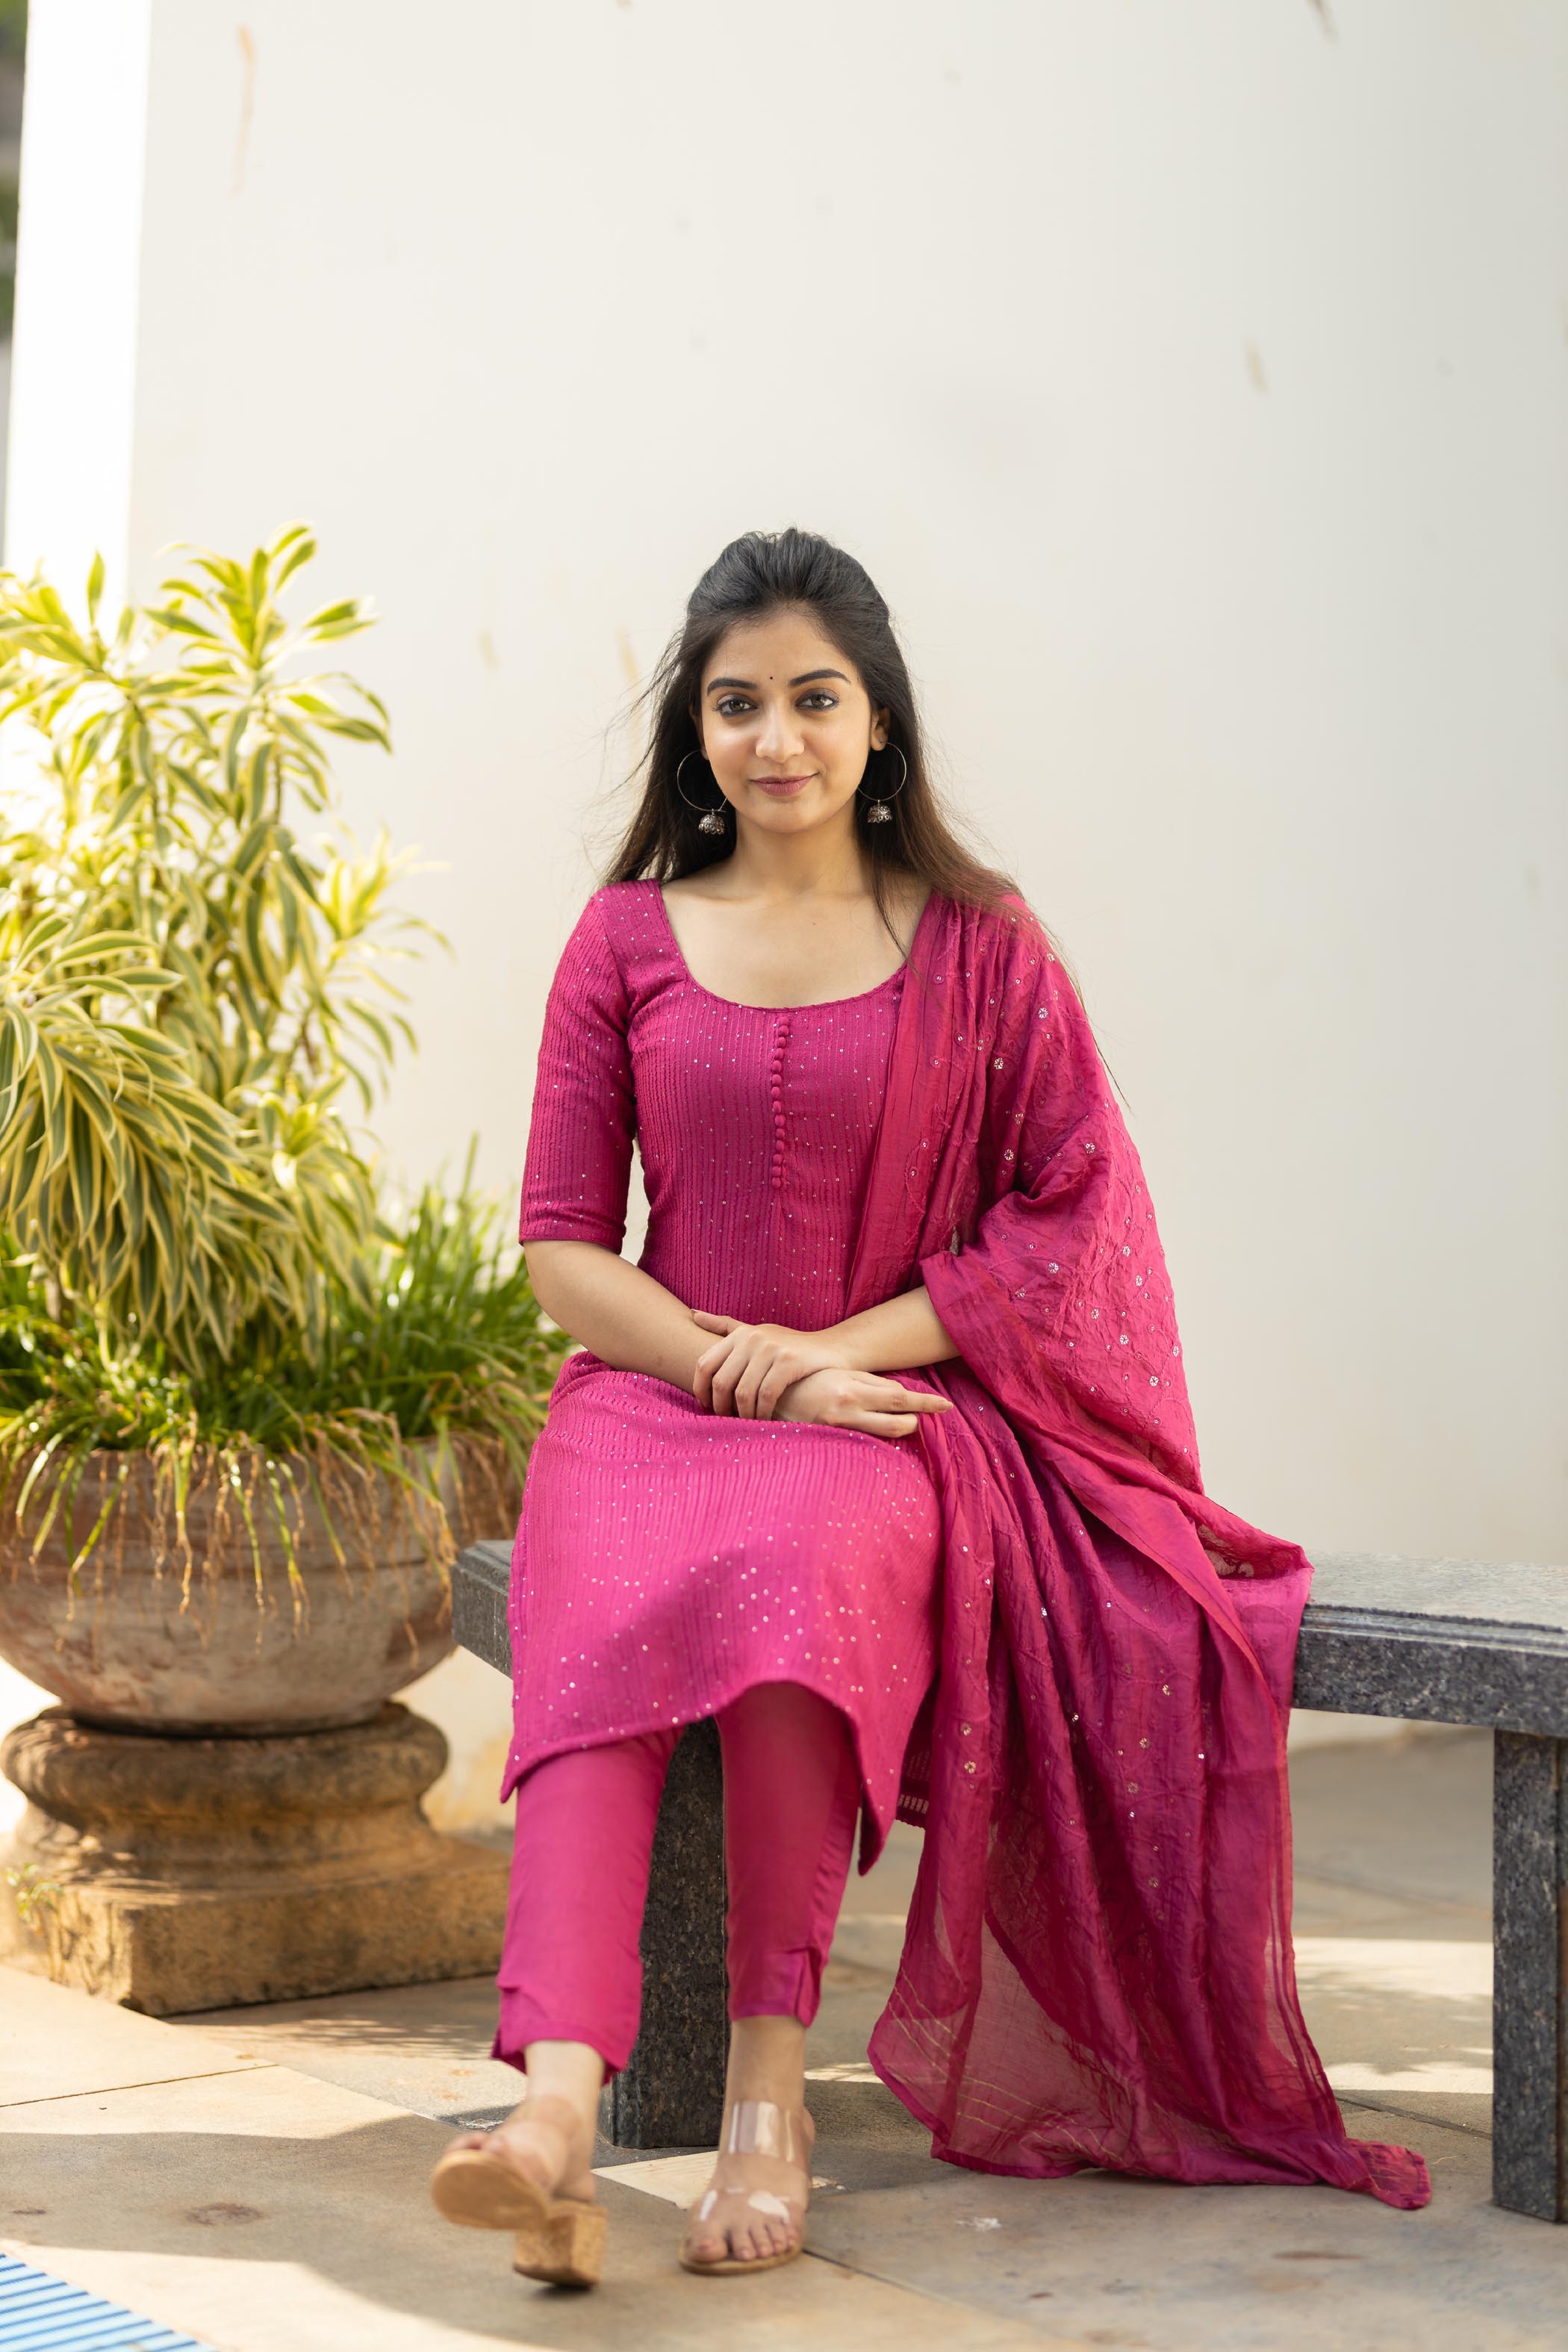 Shop our selection of designer kurti suit for women. The sequins embellished pink Chanderi cotton co-ord set features a top, pant and dupatta with beautiful embroidery. Find your perfect ethnic kurtas online today.